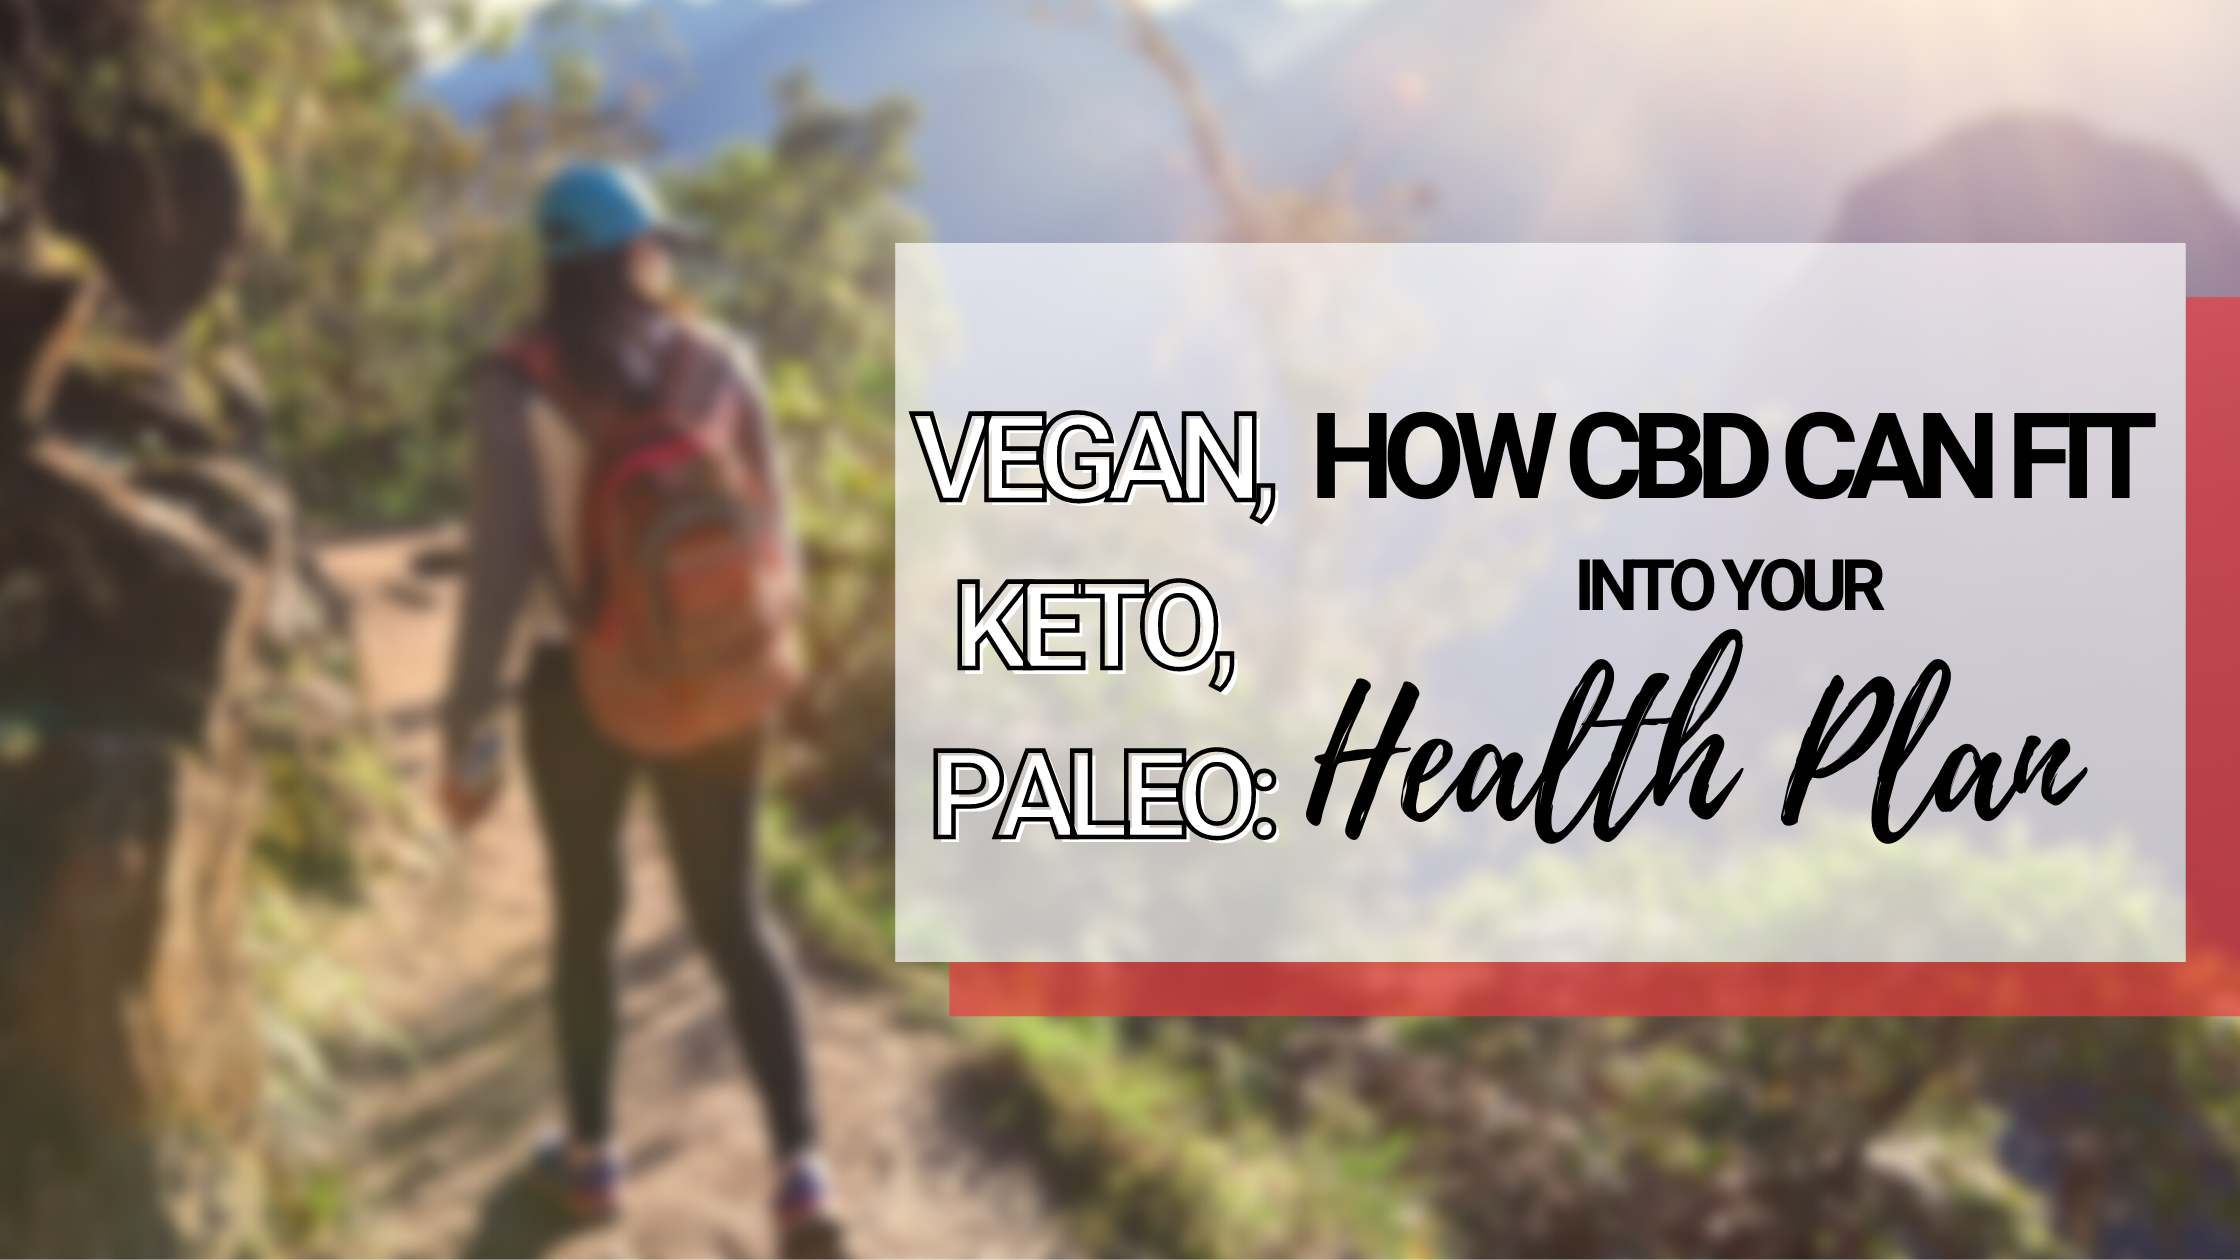 VEGAN KETO PALEO HOW CBD CAN FIT INTO YOUR HEALTH PLAN